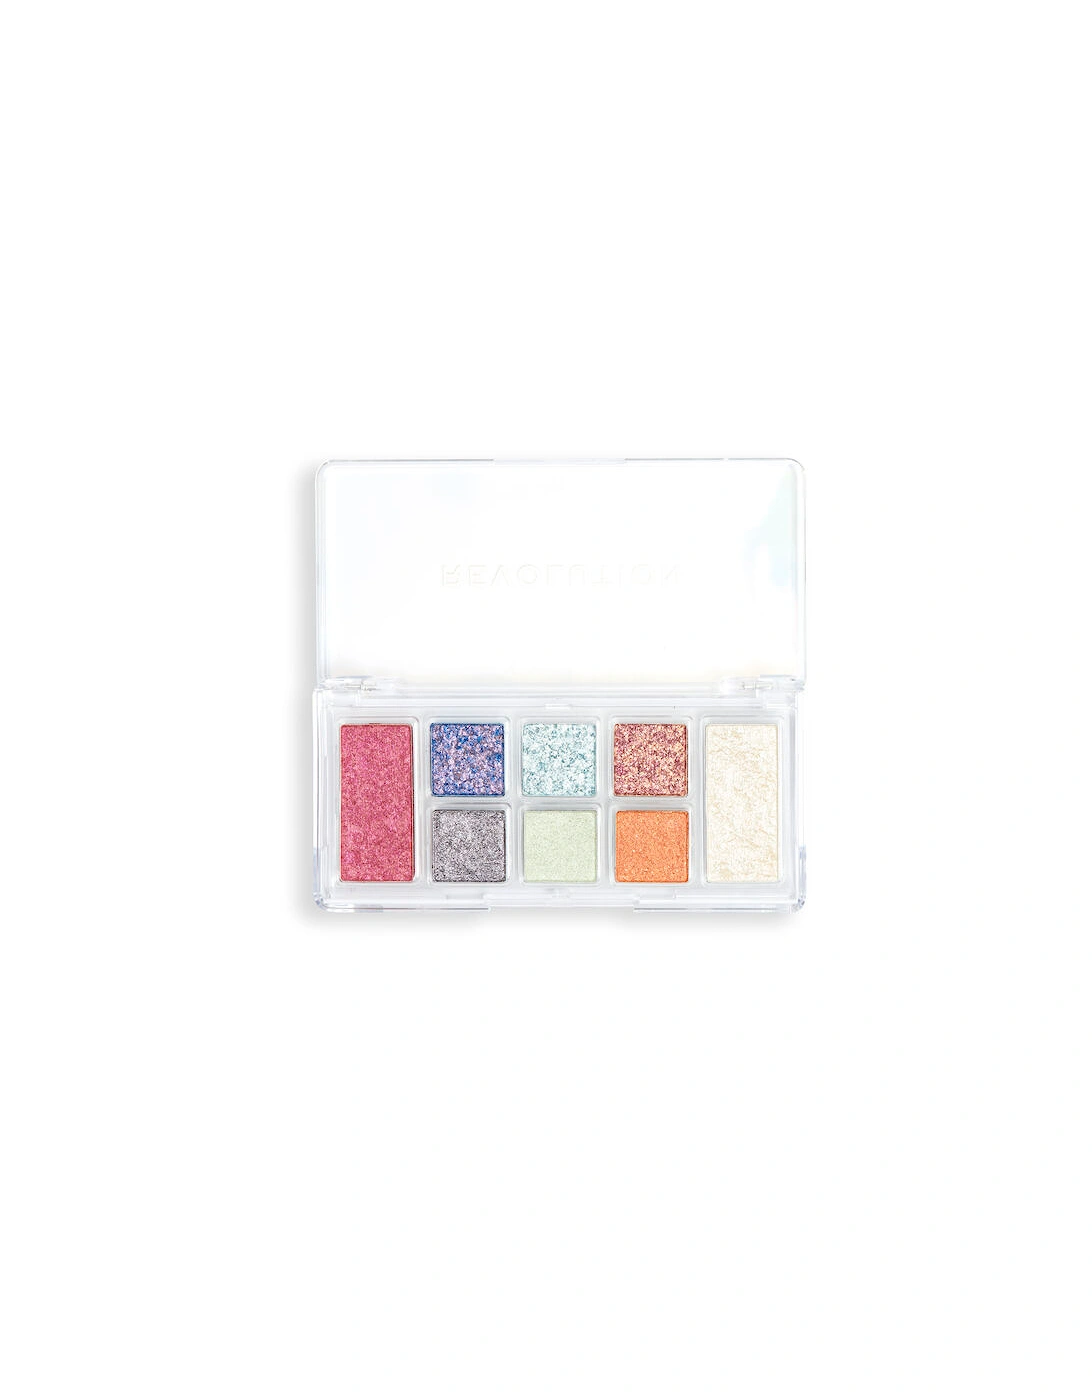 Makeup Mood Switch Hyper Real Palette, 2 of 1